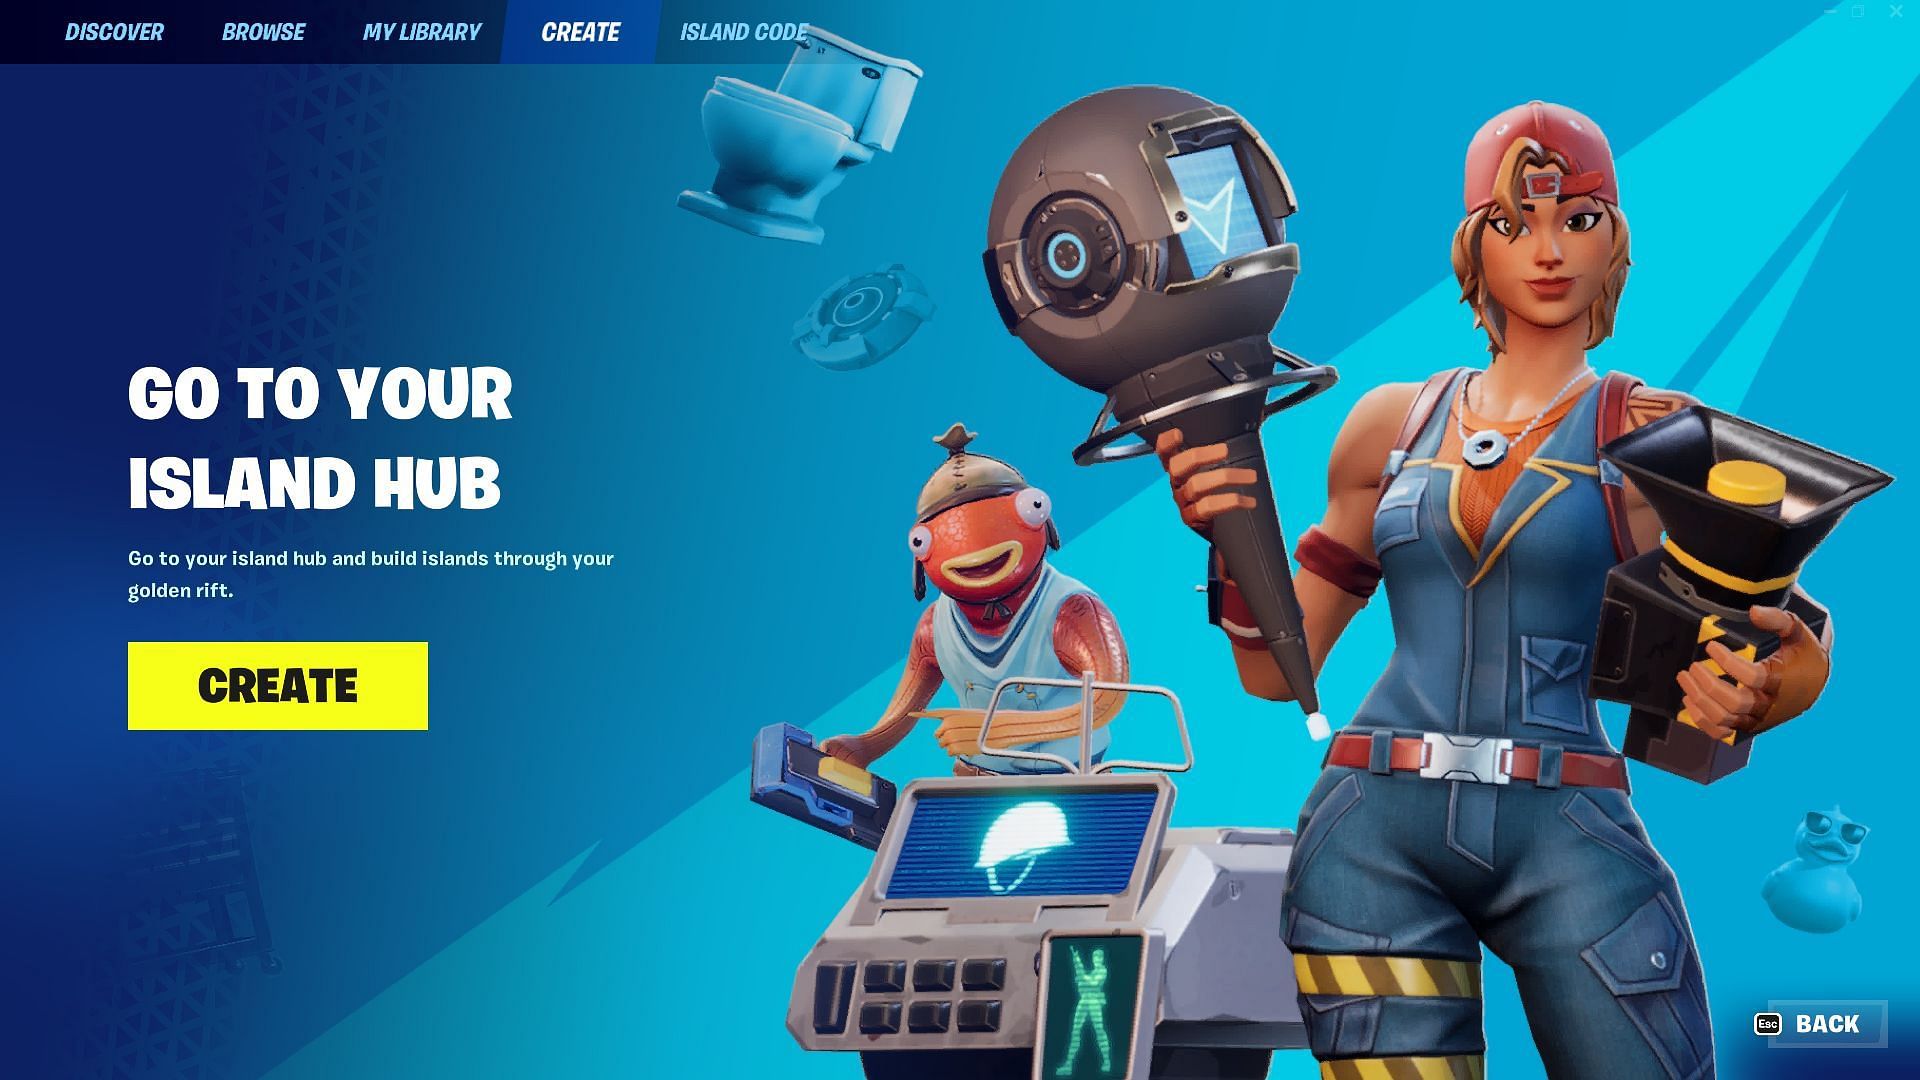 Navigate in-game to find the Create Tab (Image via Epic Games/Fortnite)